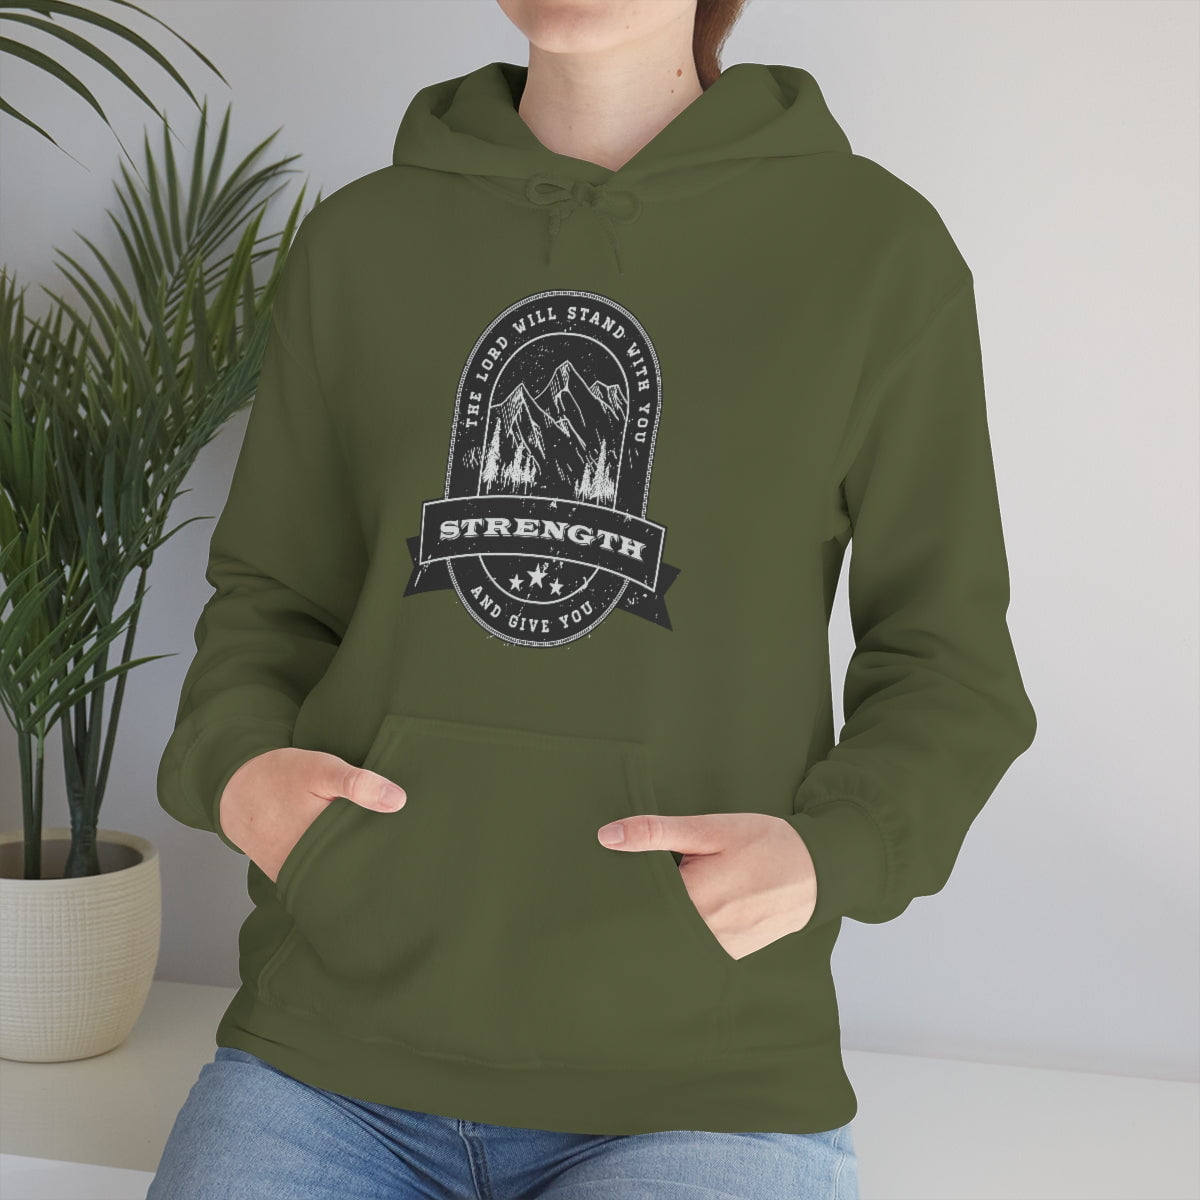 When you wear this hooded sweatshirt, you are instantly empowered with the truth that God will stand with you and give you strength. No matter what life throws your way, you can be hopeful knowing that the LORD is right by your side. This shirt is the perfect way to share your faith with those around you and let them know that they are not alone in their struggles. With its simple and encouraging message, you can help lead someone to Christ.